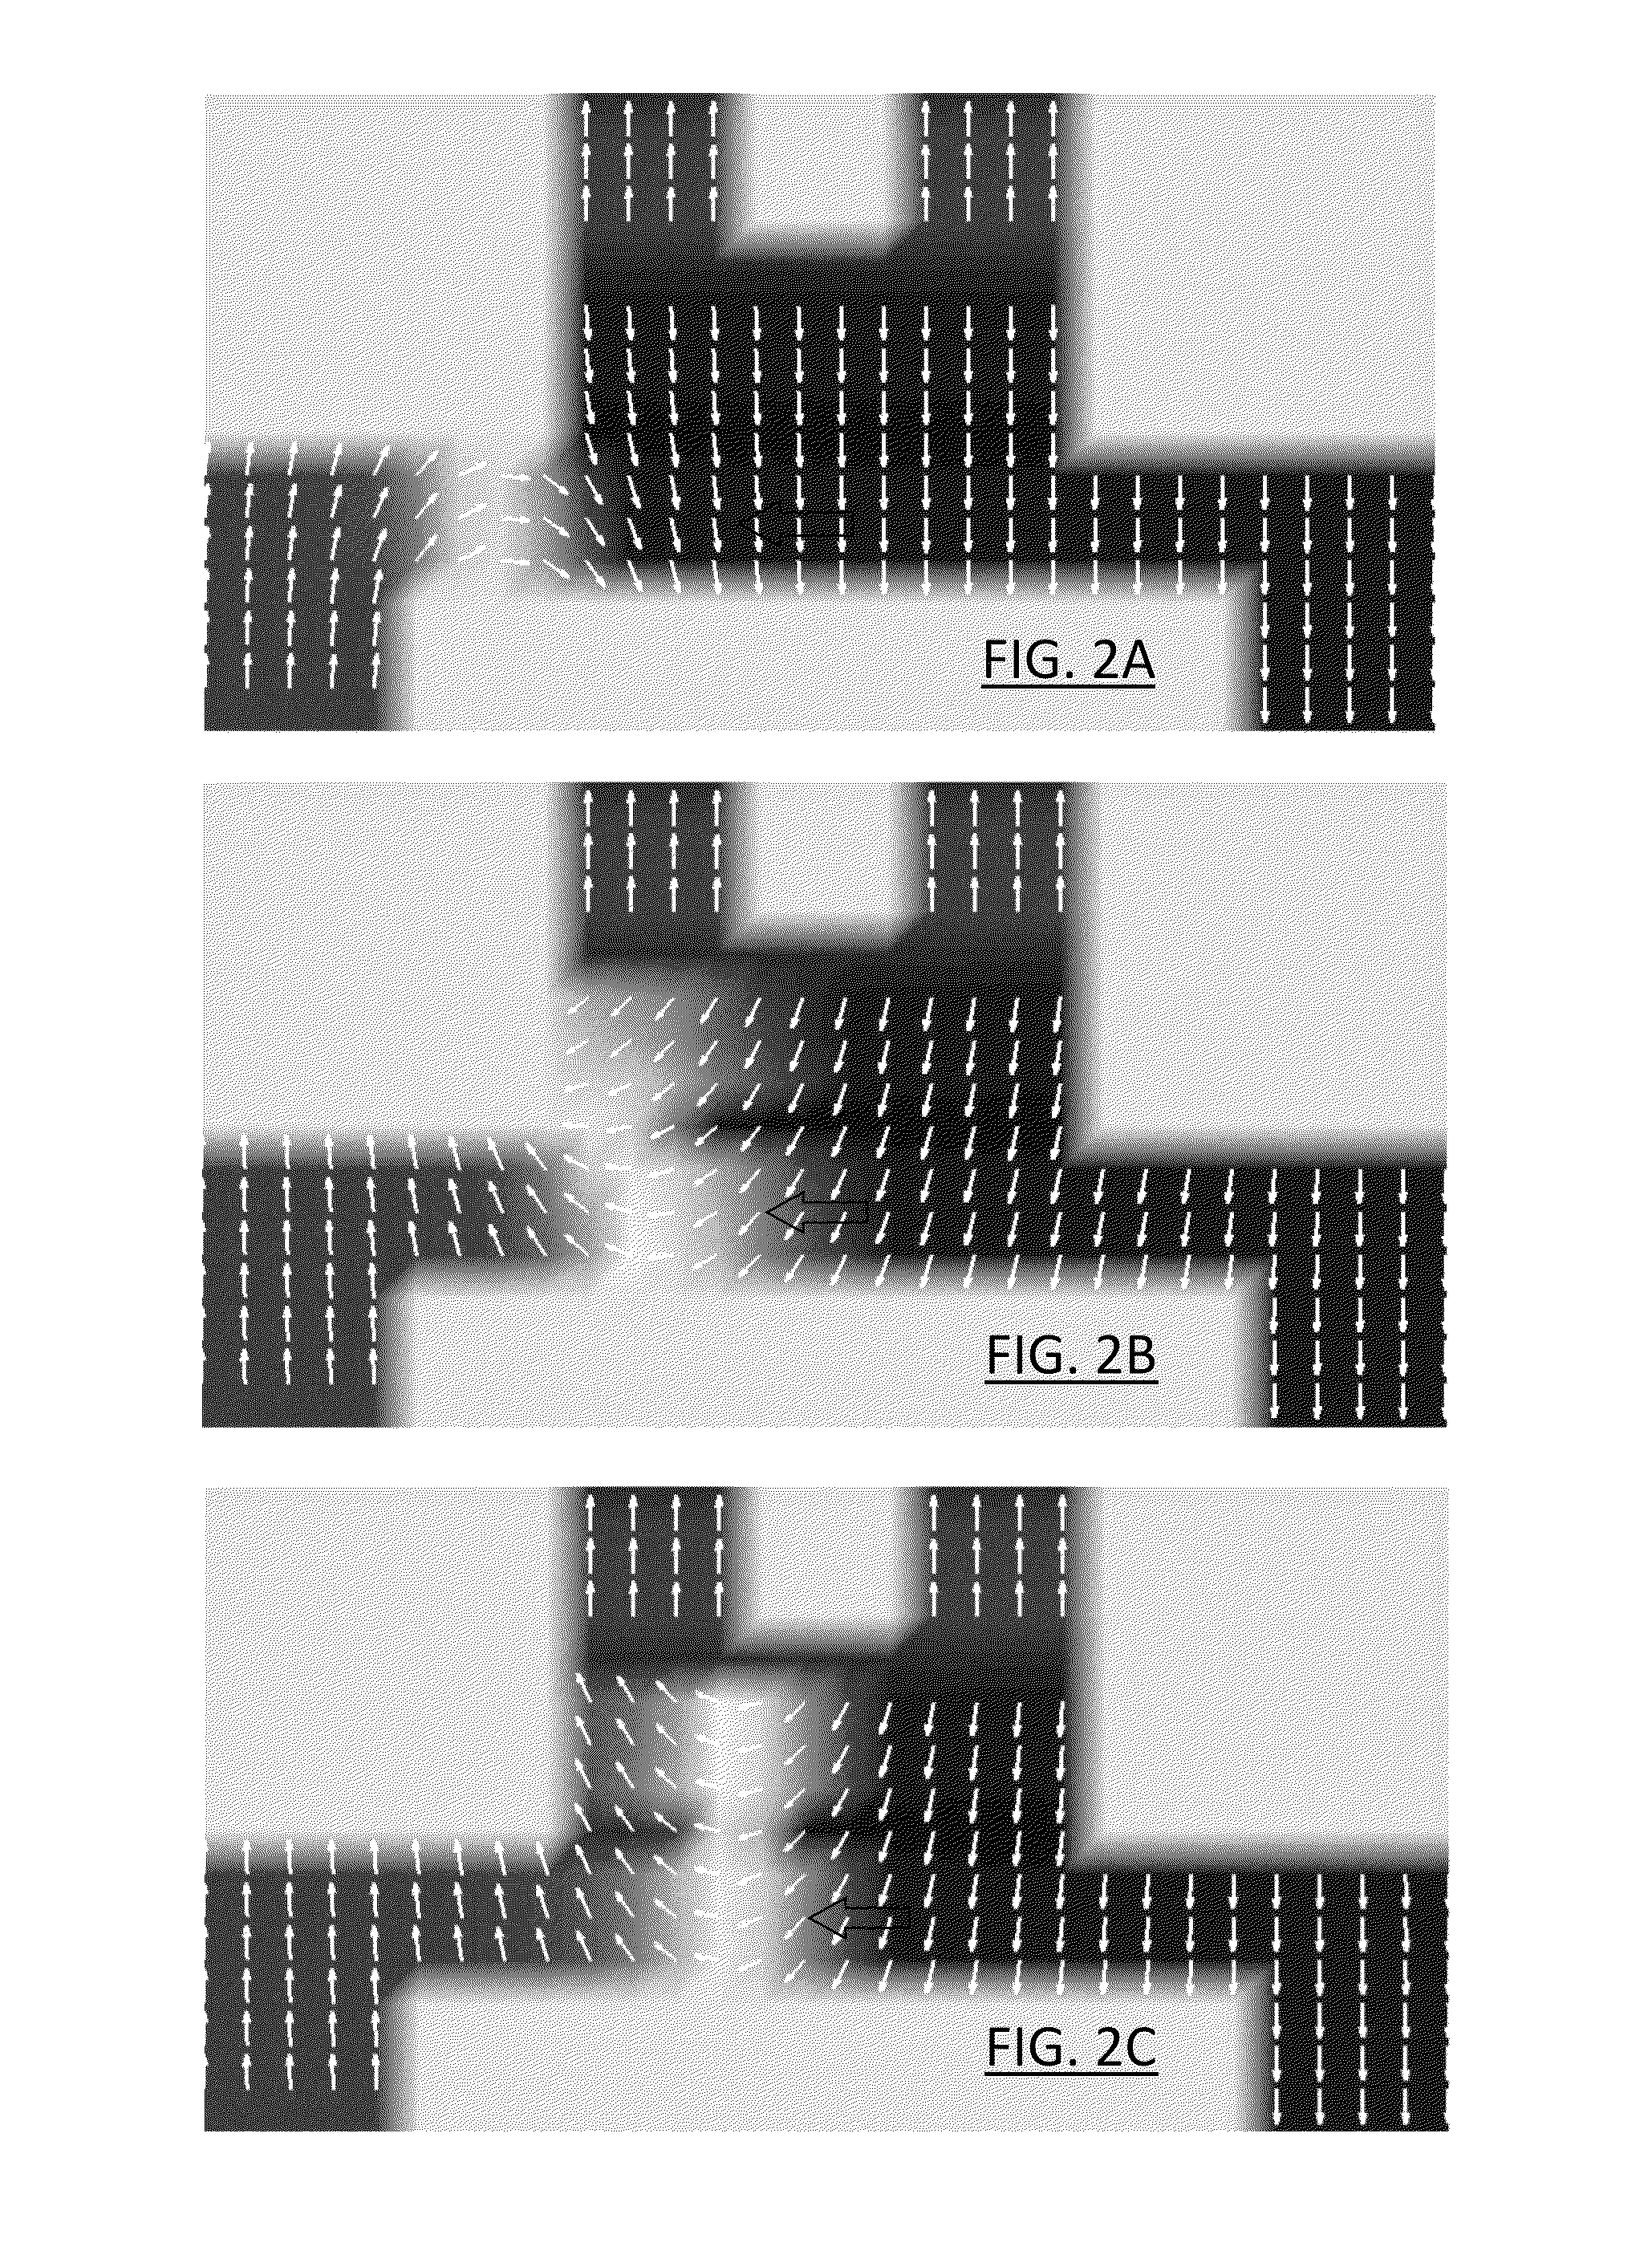 Magnetic logic circuits and systems incorporating same